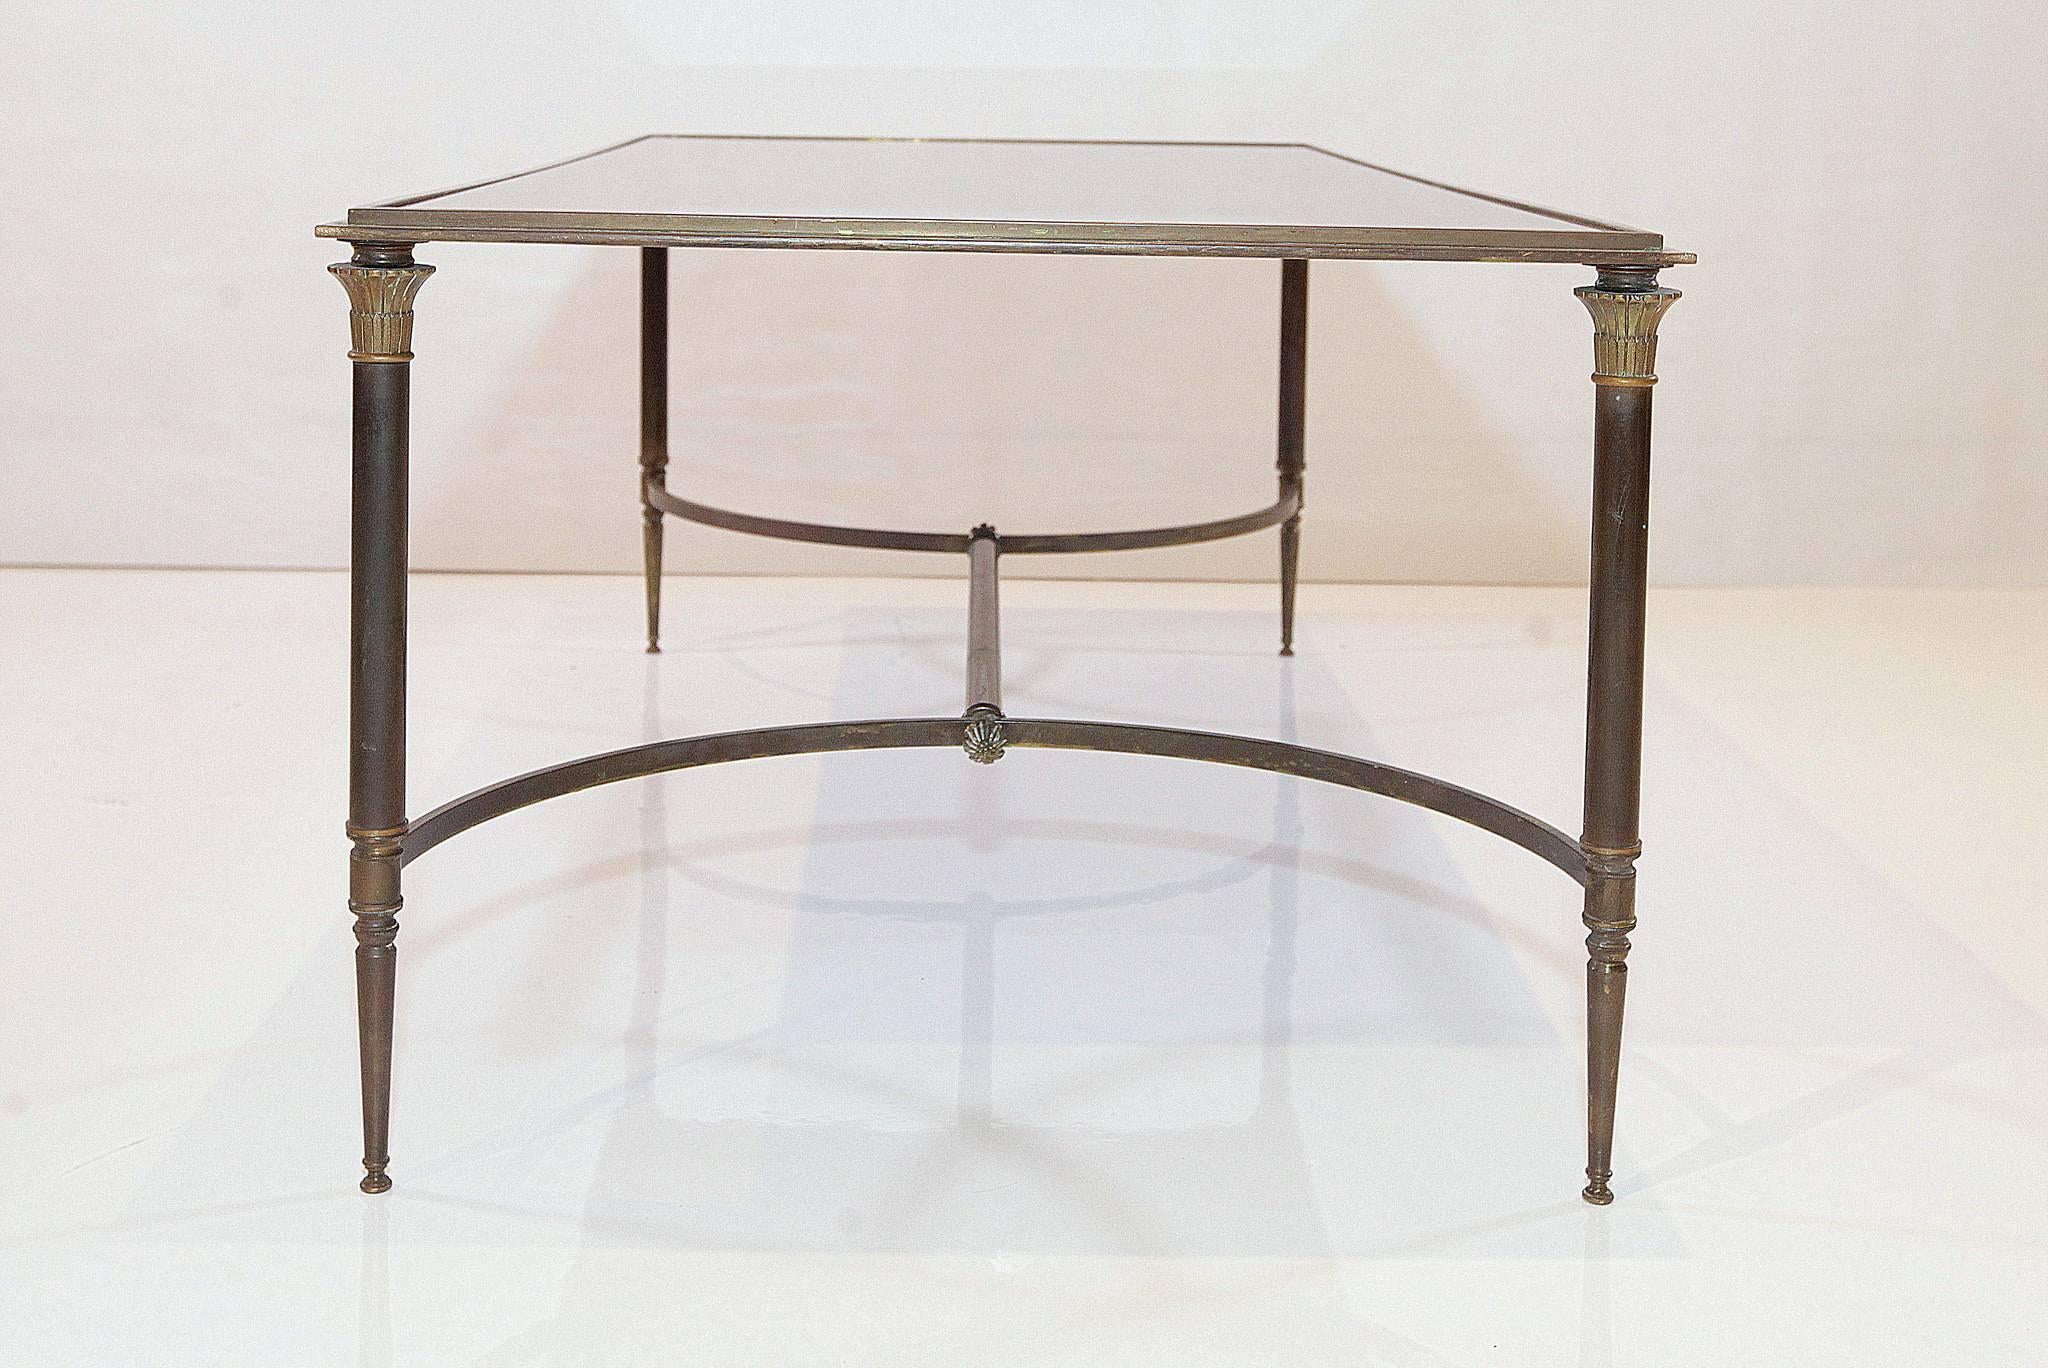 French Maison Jansen style bronze cocktail table with mirrored top, circa 1960.